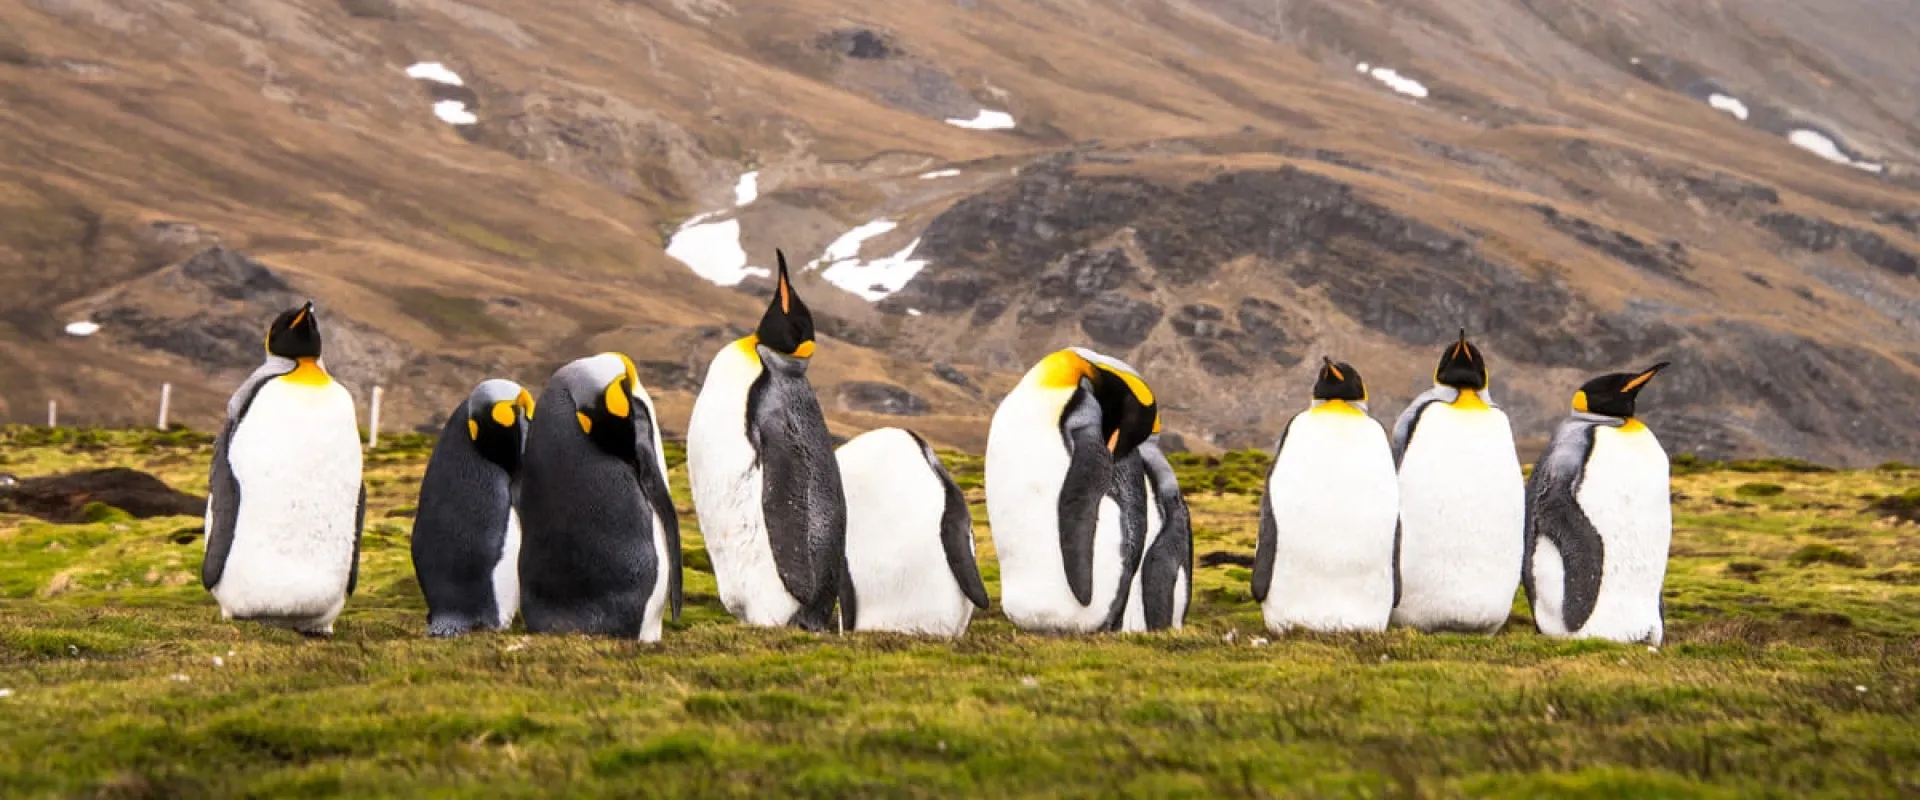 A group of king penguins in Chile